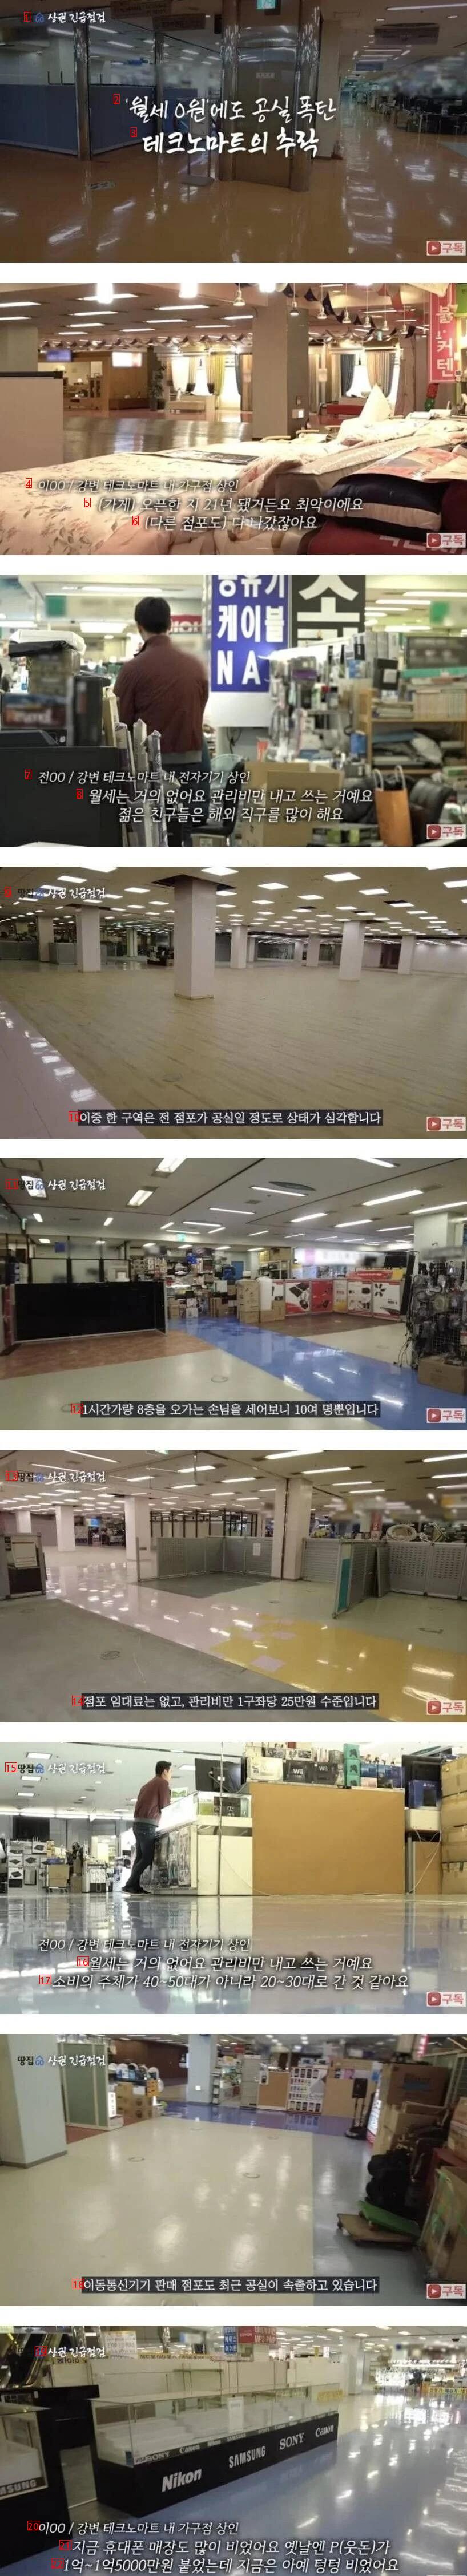 The recent situation of Gangbyeon Techno Mart, which has a vacancy rate of 0 won per month, is crazy